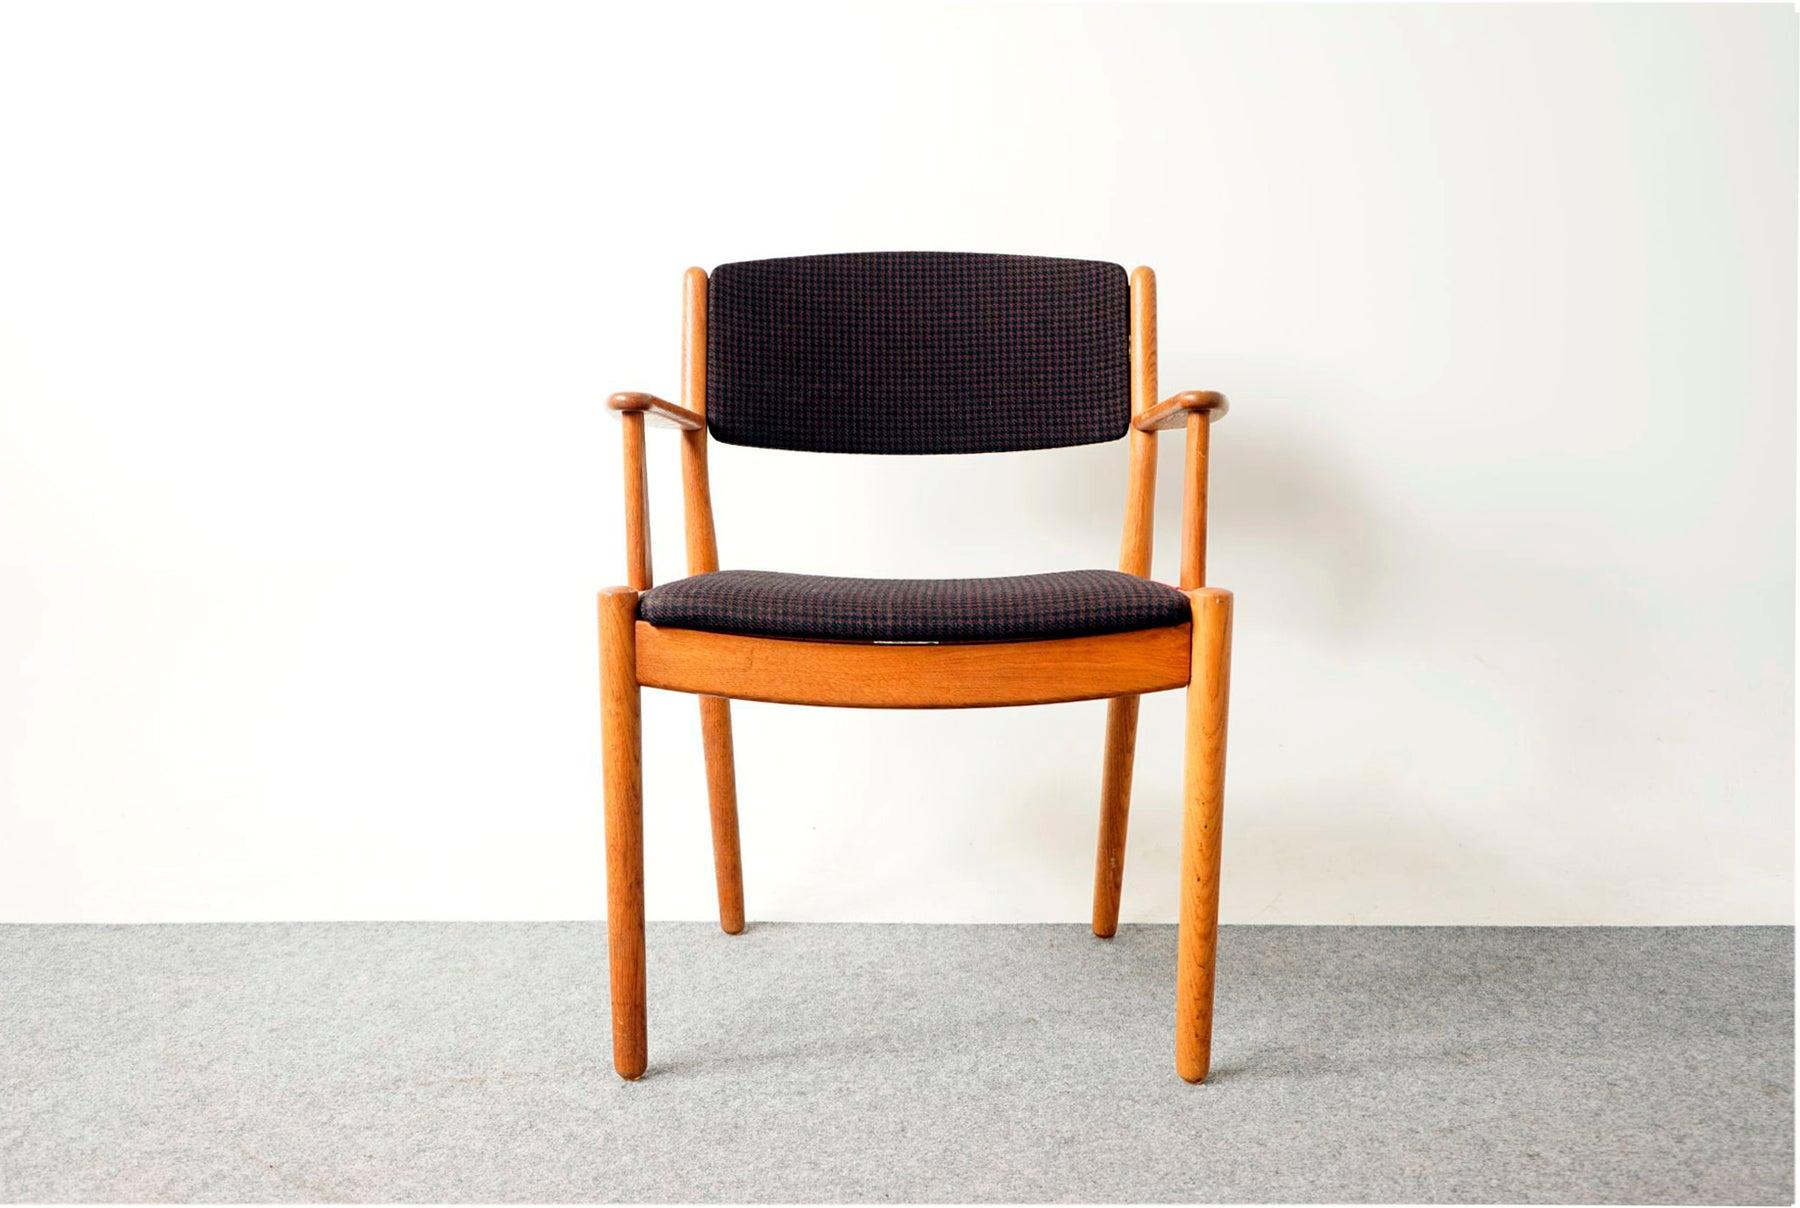 Oak Danish modern arm chair by Poul Volther for FDB, circa 1960's. Solid wood frame with upright upholstered back provides support and comfort. This beautifully sculpted frame offers comfort without an imposing footprint. Clean modern design makes